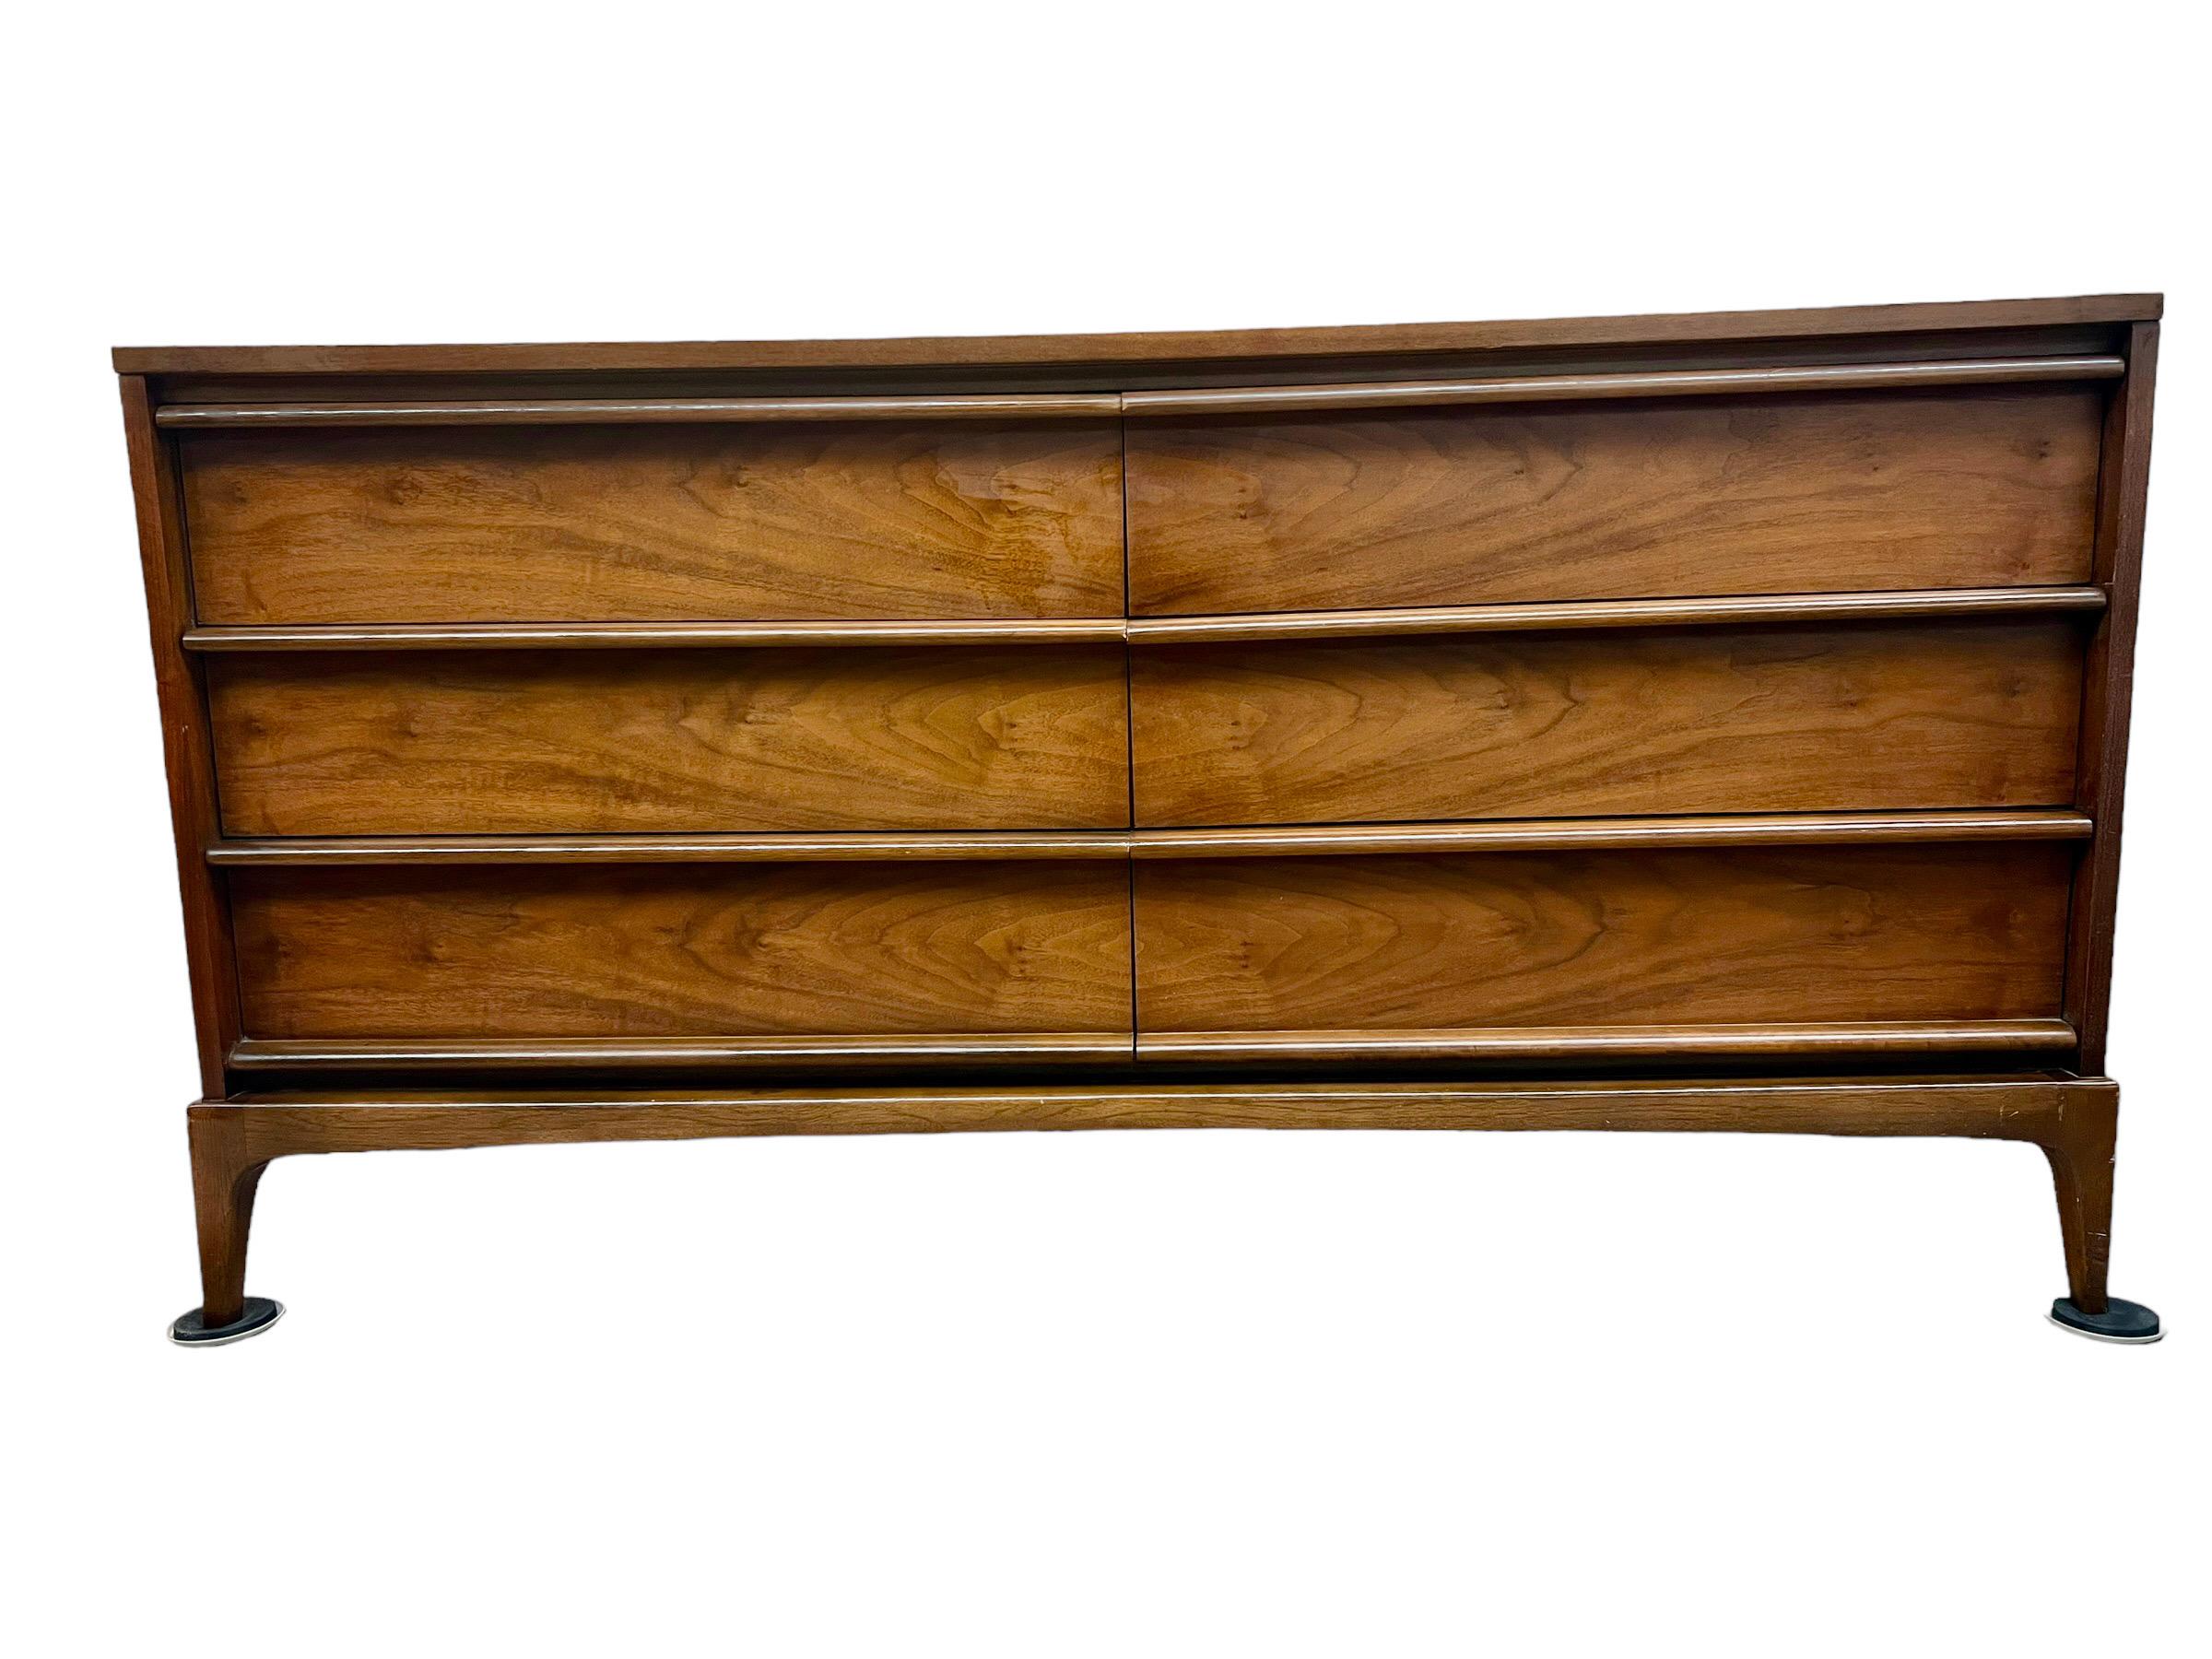 This Vintage Mid Century Modern Walnut Dresser was Manufactured by Lane. It is 6 Drawer Lowboy Style with a Generous Amount of Storage Space. The Wood Grain Detail on the Drawer Front is Impressive. This Piece has a Solid Wood Top and Carved Wood